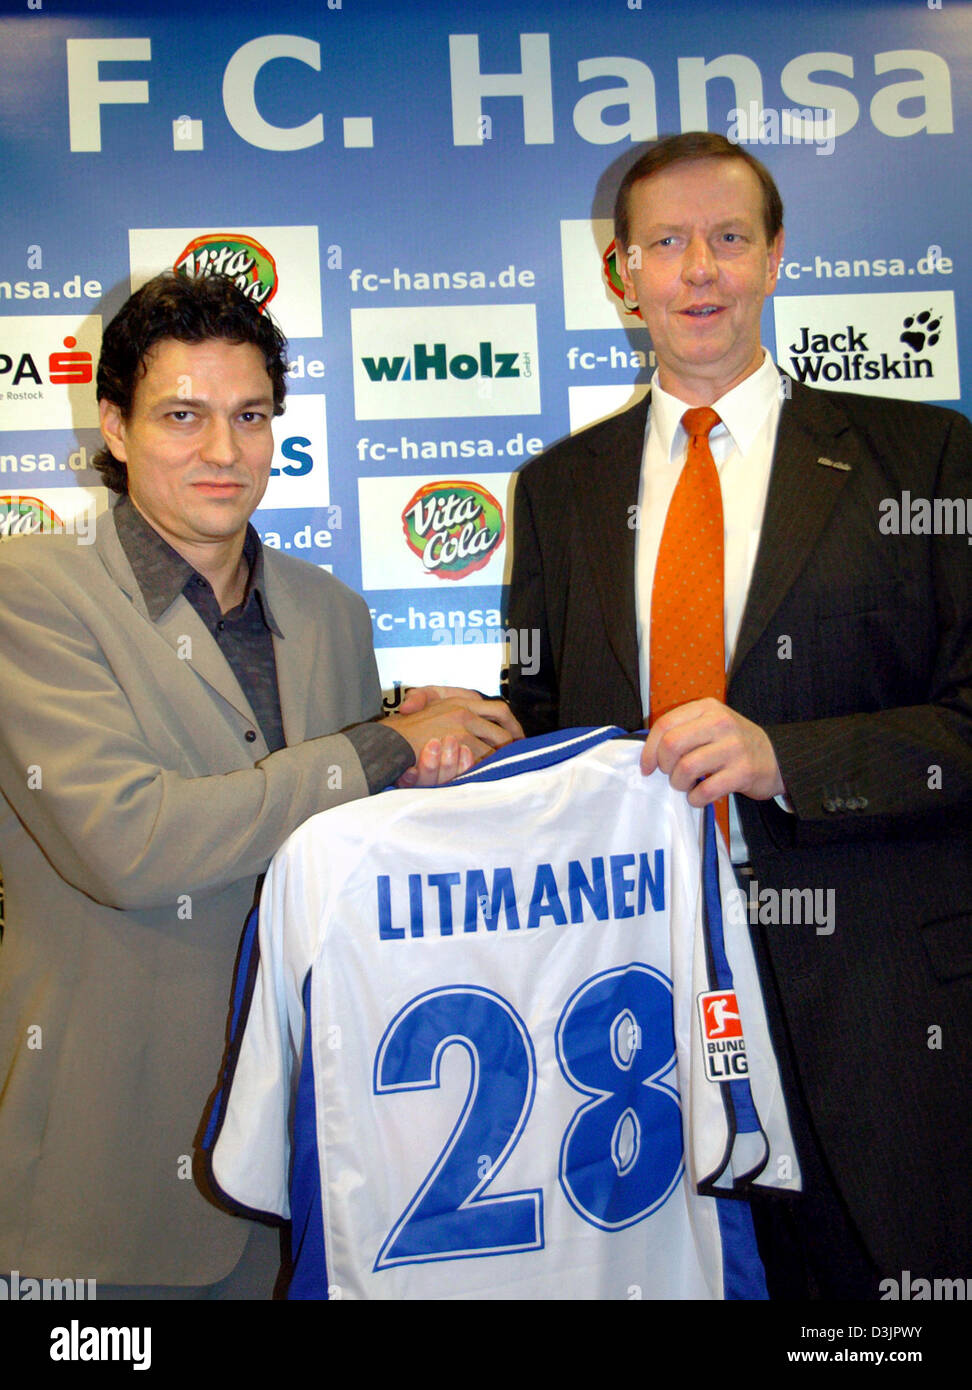 dpa) - Finnish national player Jari Litmanen (L) receives his jersey as the  new player of soccer club Hansa Rostock, which is in the danger of  relegation, by Hansa Chairman Manfred Wimmer